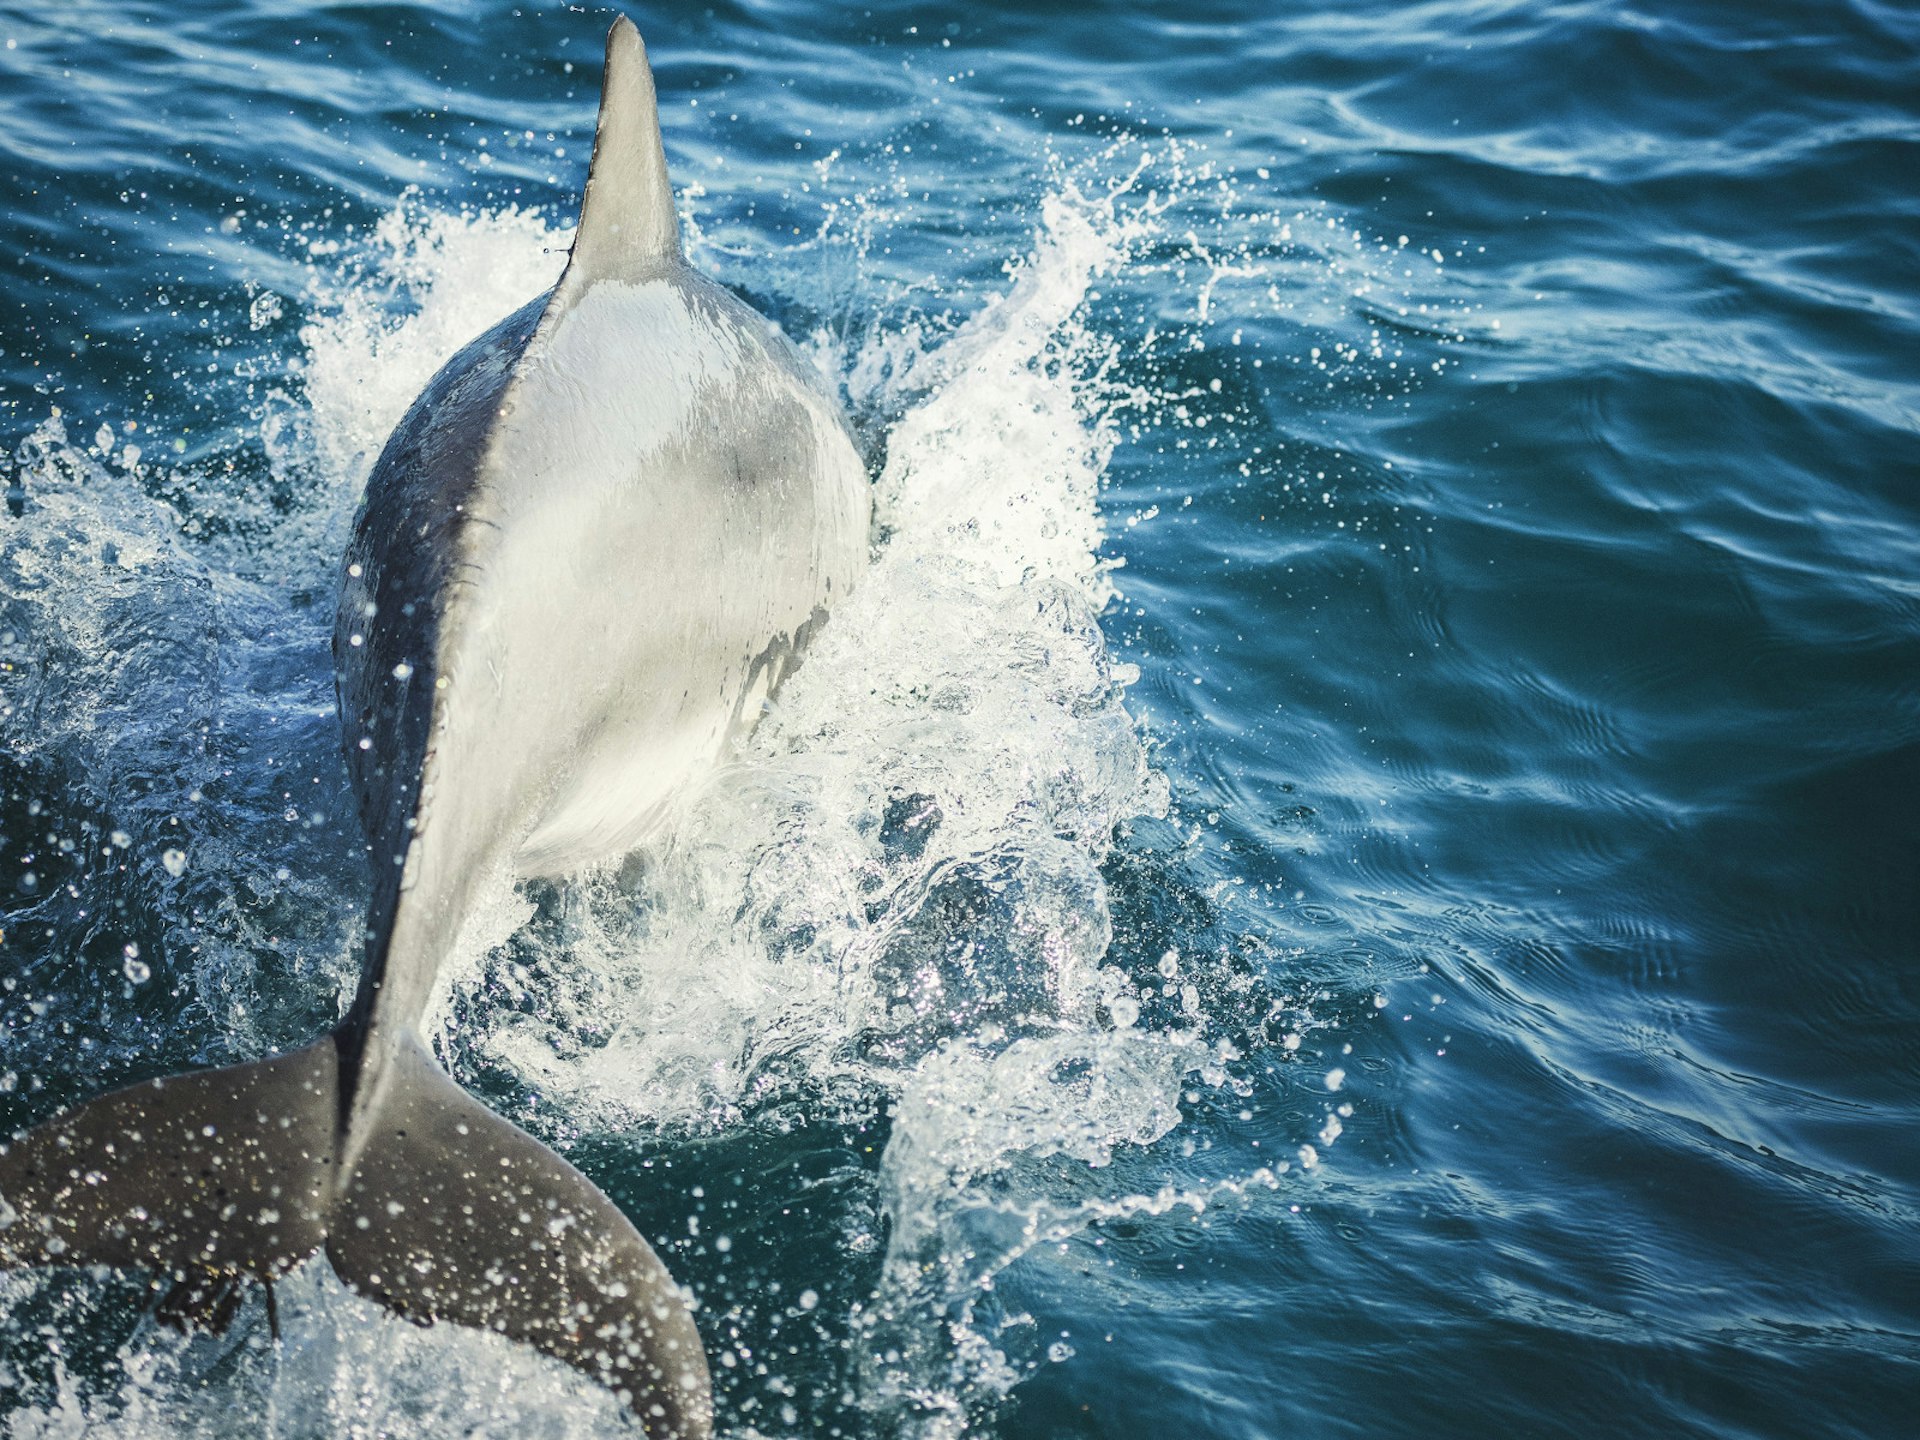 A dolphin skimming the waters of Jervis Bay, Australia